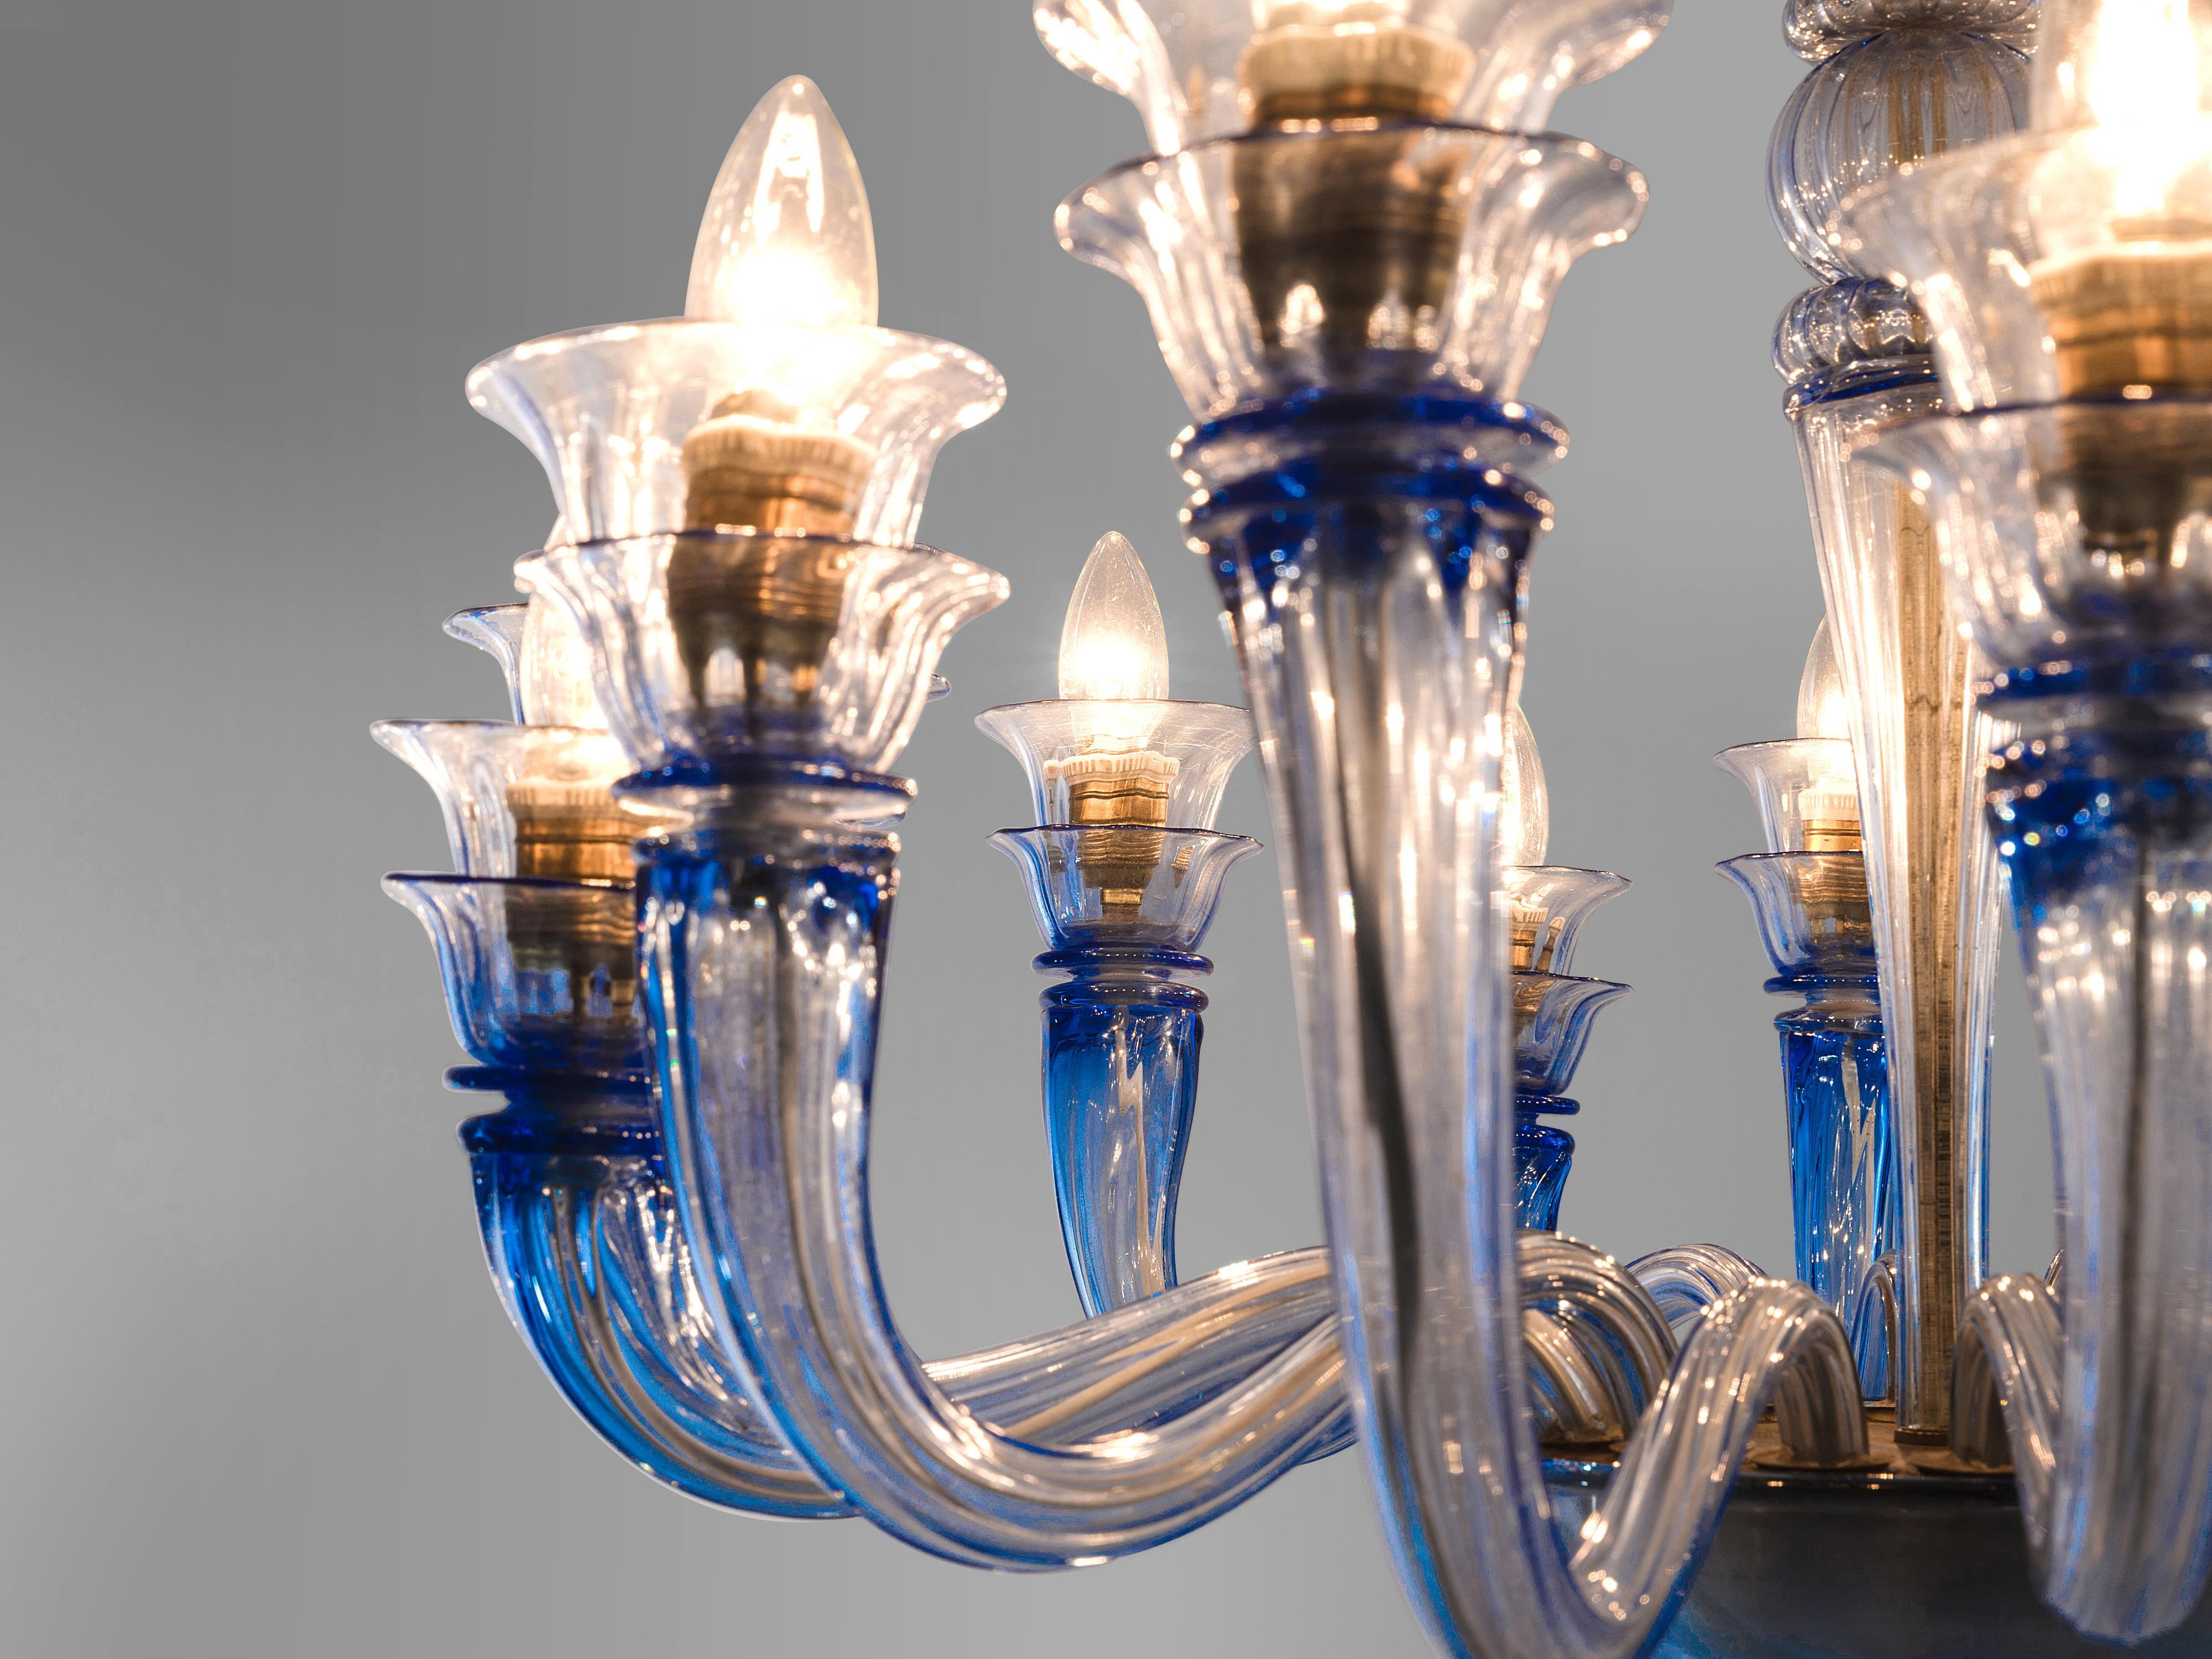 Venini, chandelier, glass, Italy, 1930s.

This chandelier is blue colored glass features multiple, floral and biomorph features. These, and the colored glass are Classic features of Venini. The chandelier is an eyecatcher and creates a stunning